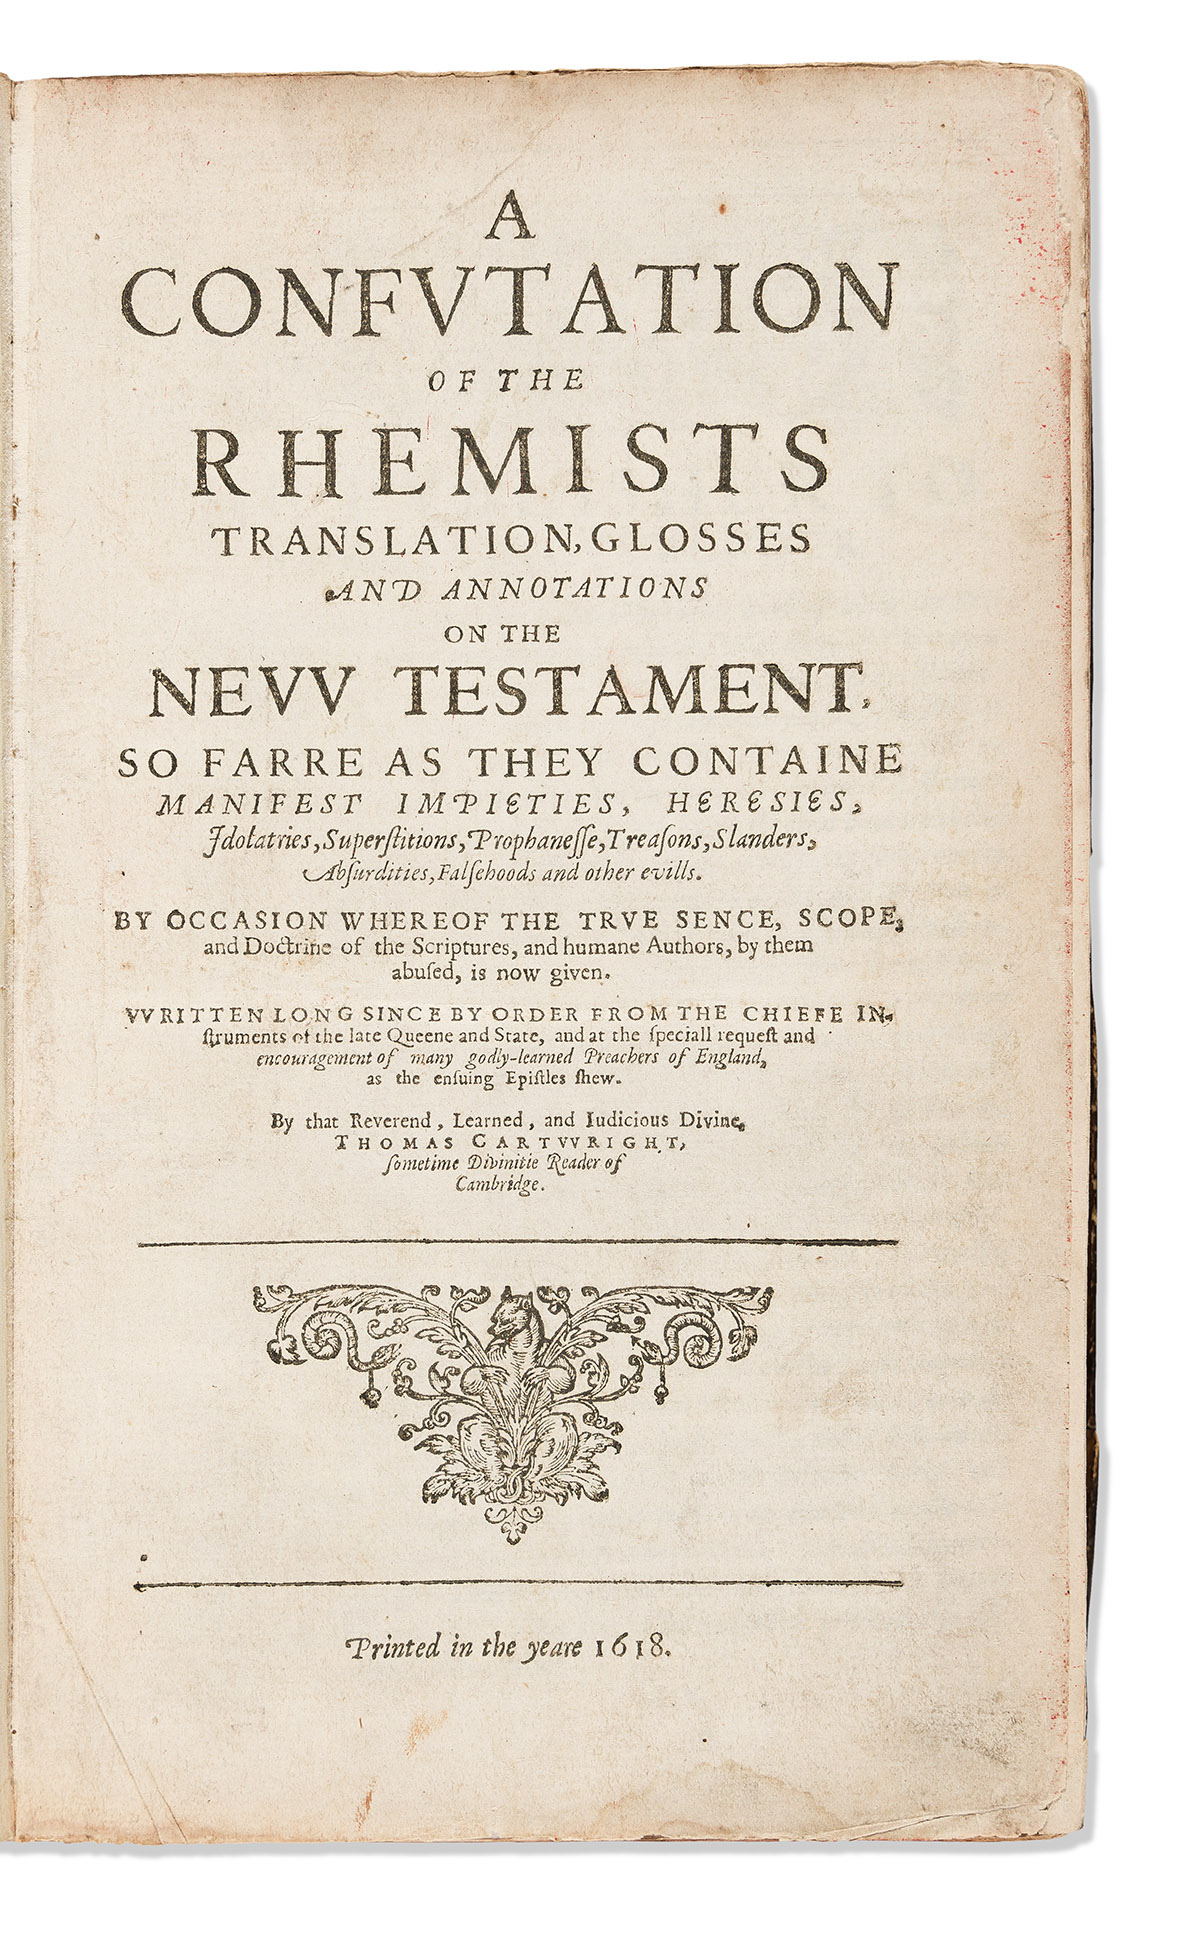 Cartwright, Thomas (1535-1603) A Confutation of the Rhemists Translation, Glosses and Annotations on the New Testament. So Farre as the